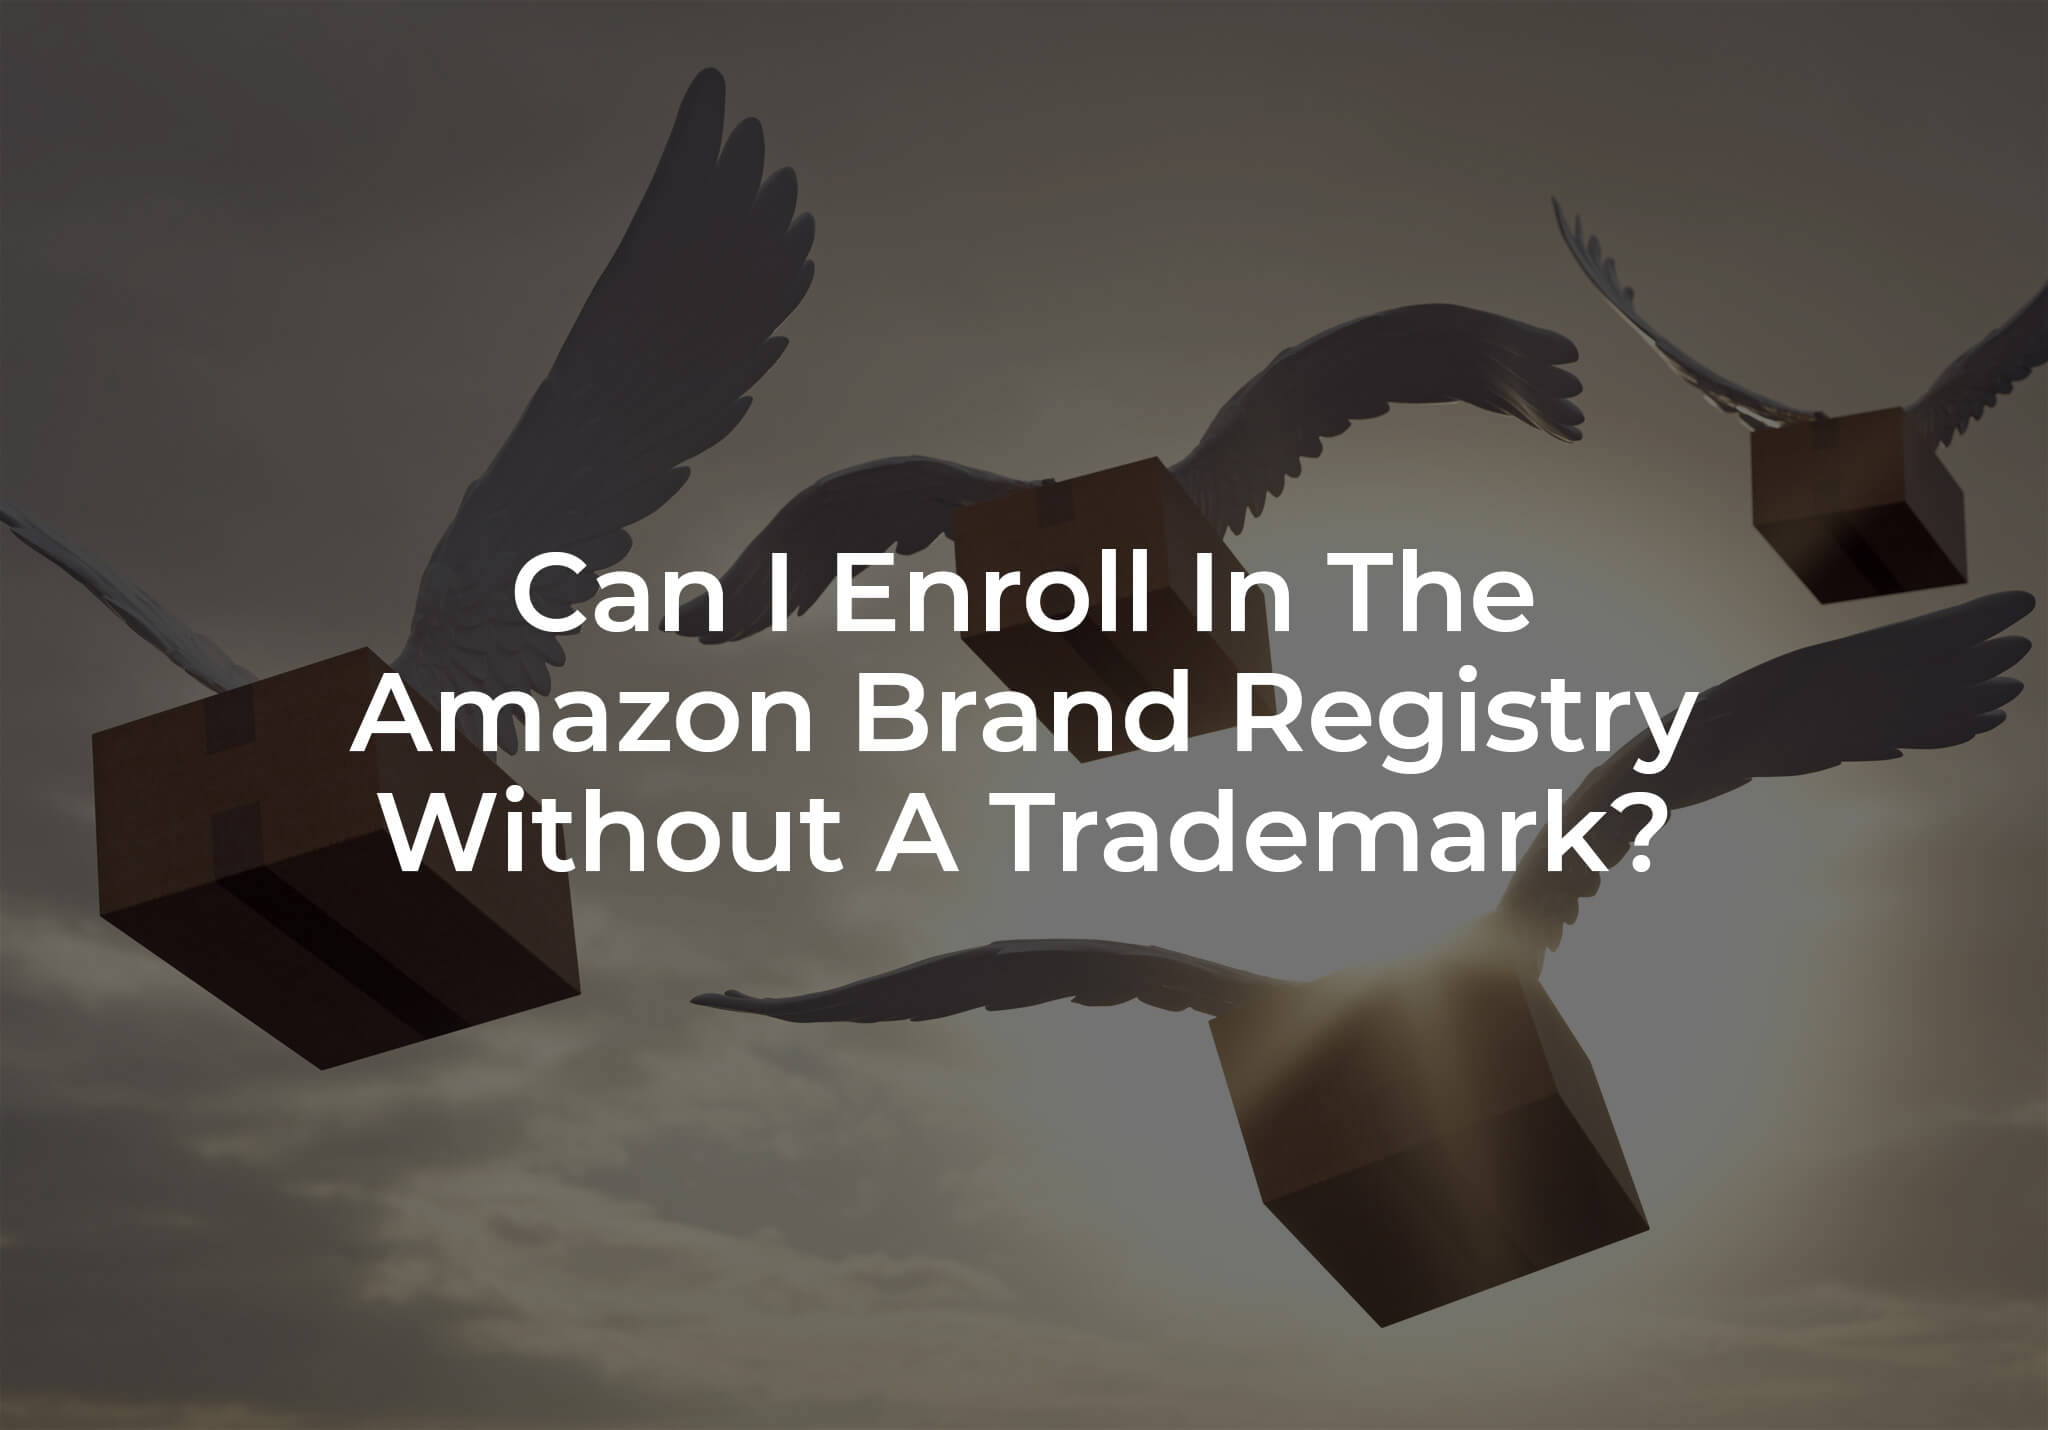 Can I Enroll In The Amazon Brand Registry Without A Trademark?